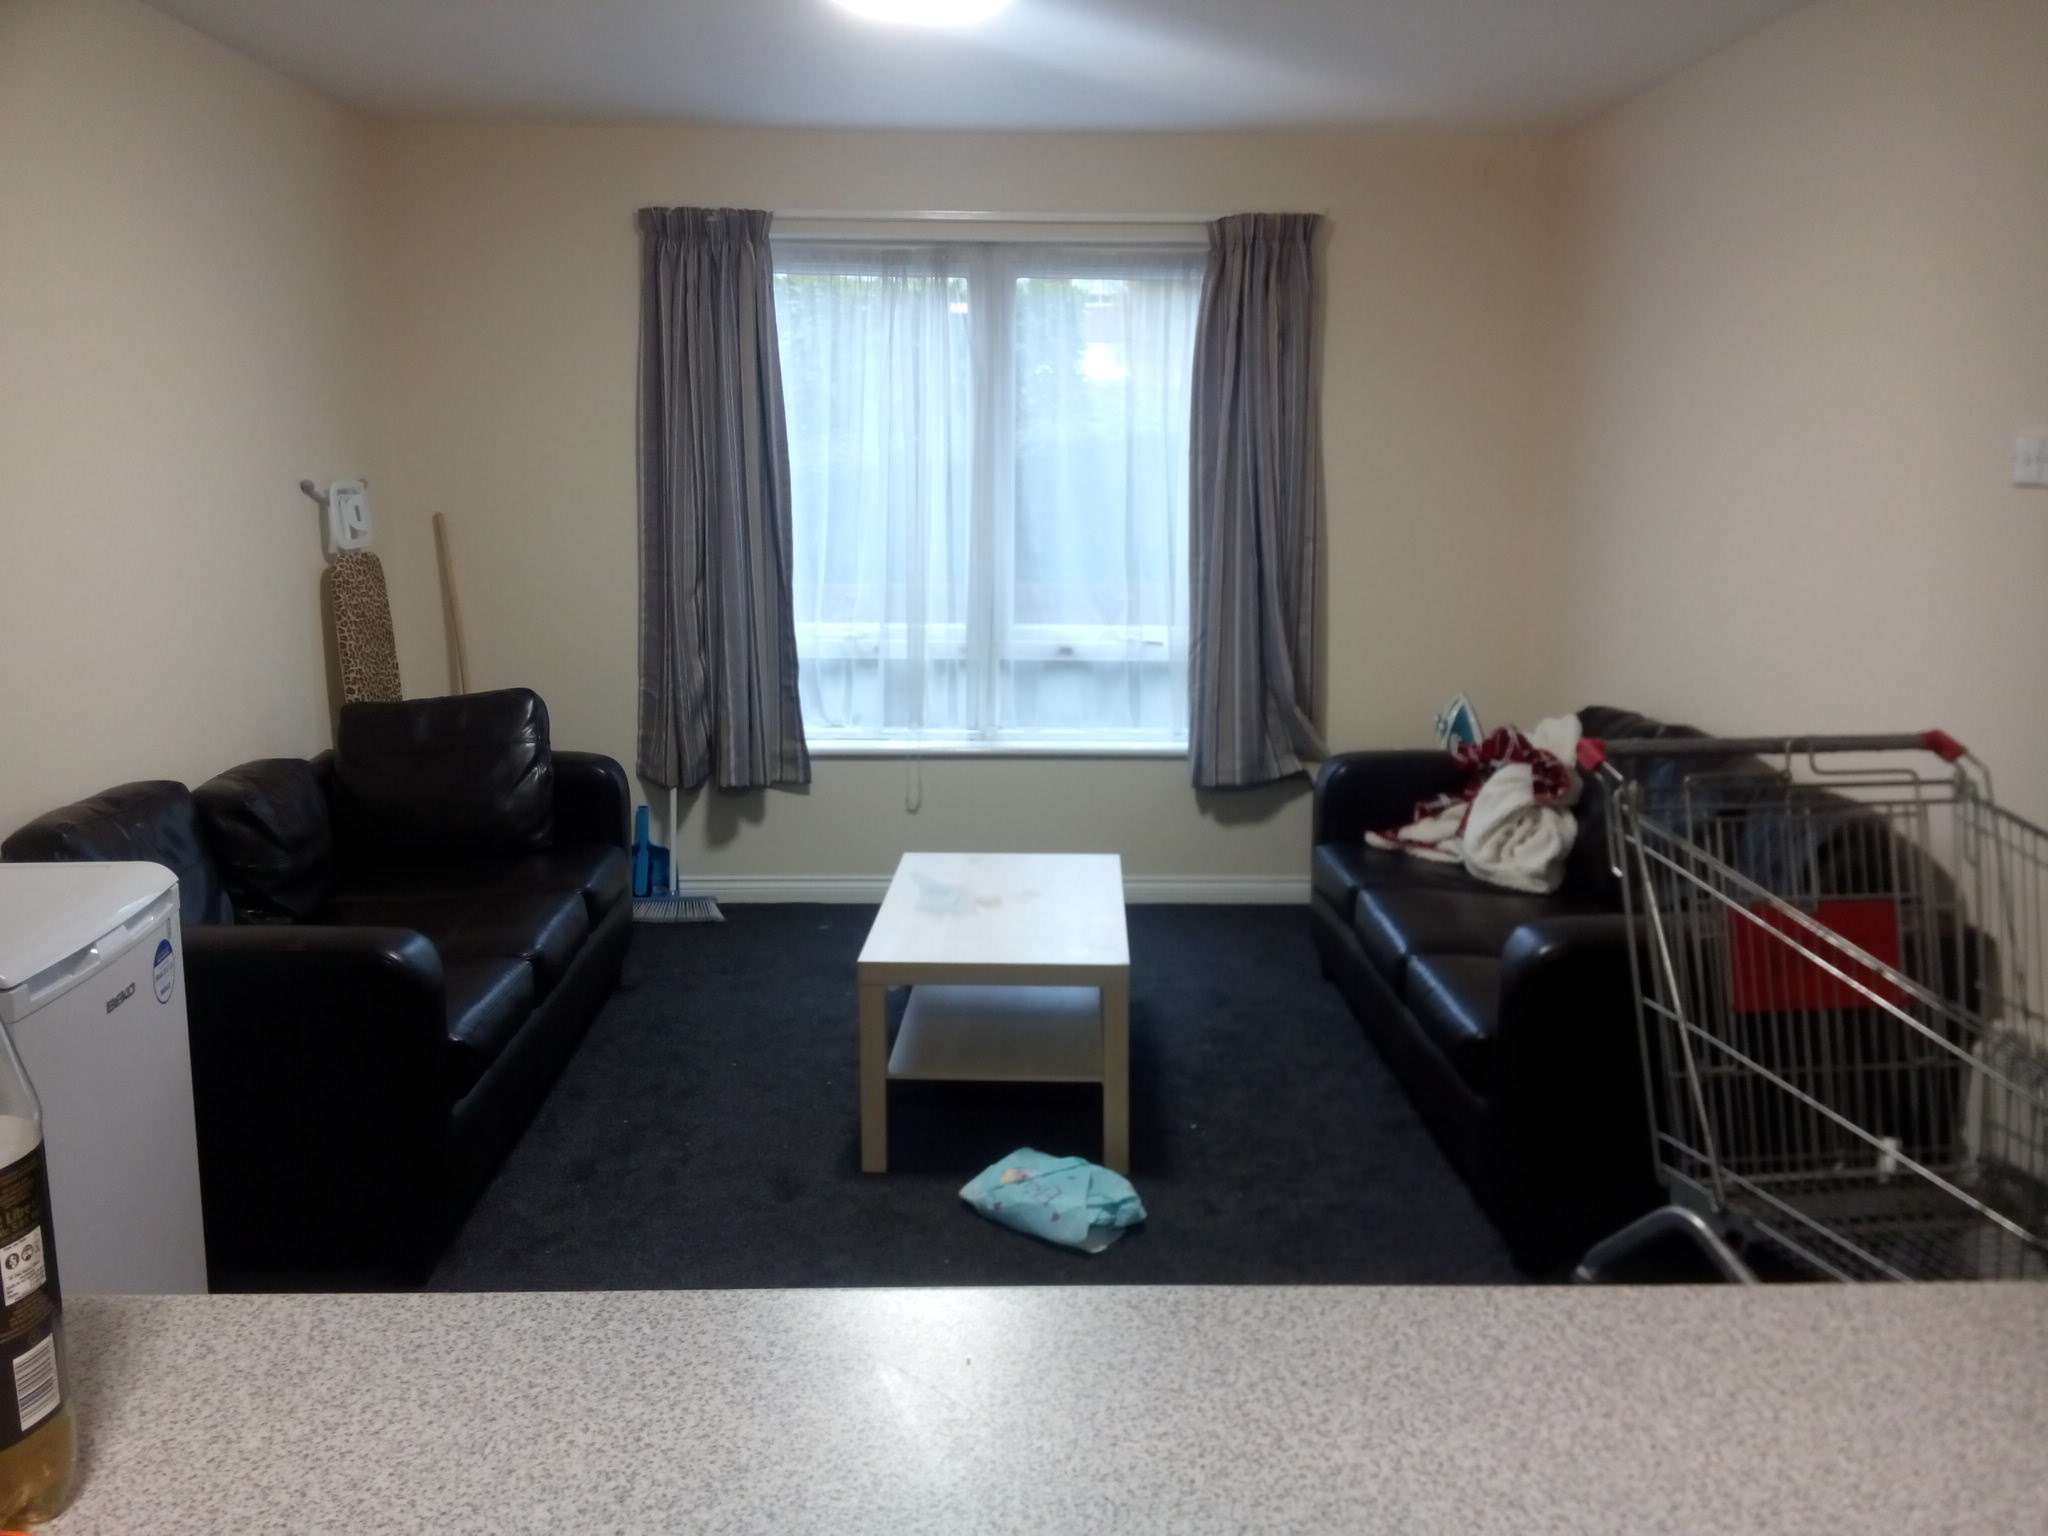 Private common room not shared with other accommodation users